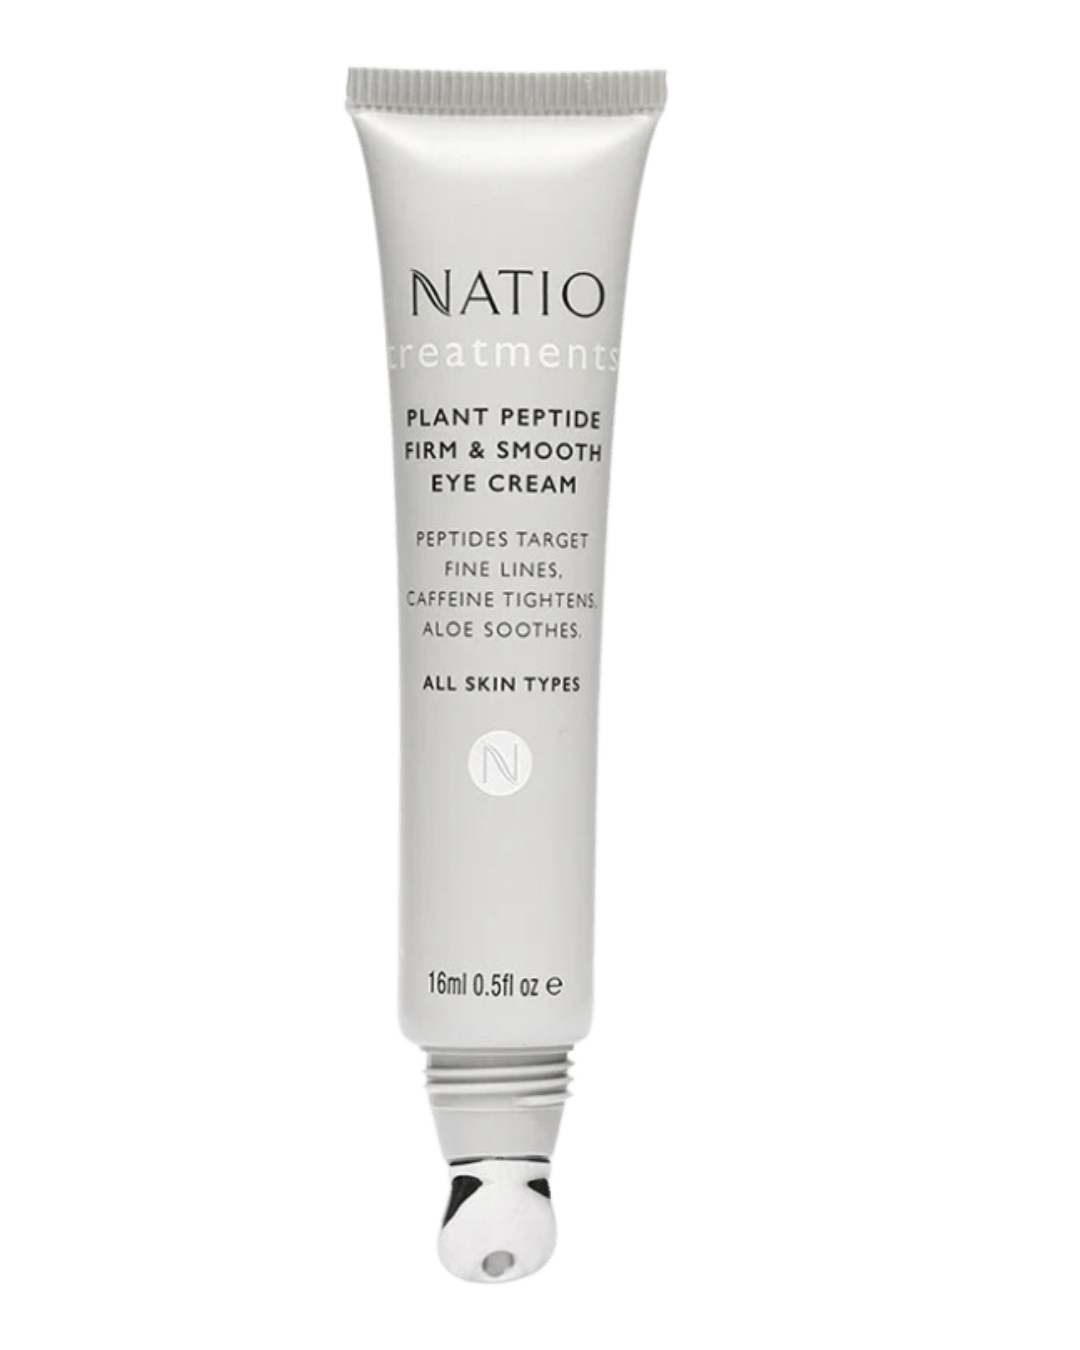 Daily Vanity Beauty Awards 2024 Best Skincare Natio Plant Peptide Firm &#038; Smooth Eye Cream Voted By Beauty Experts